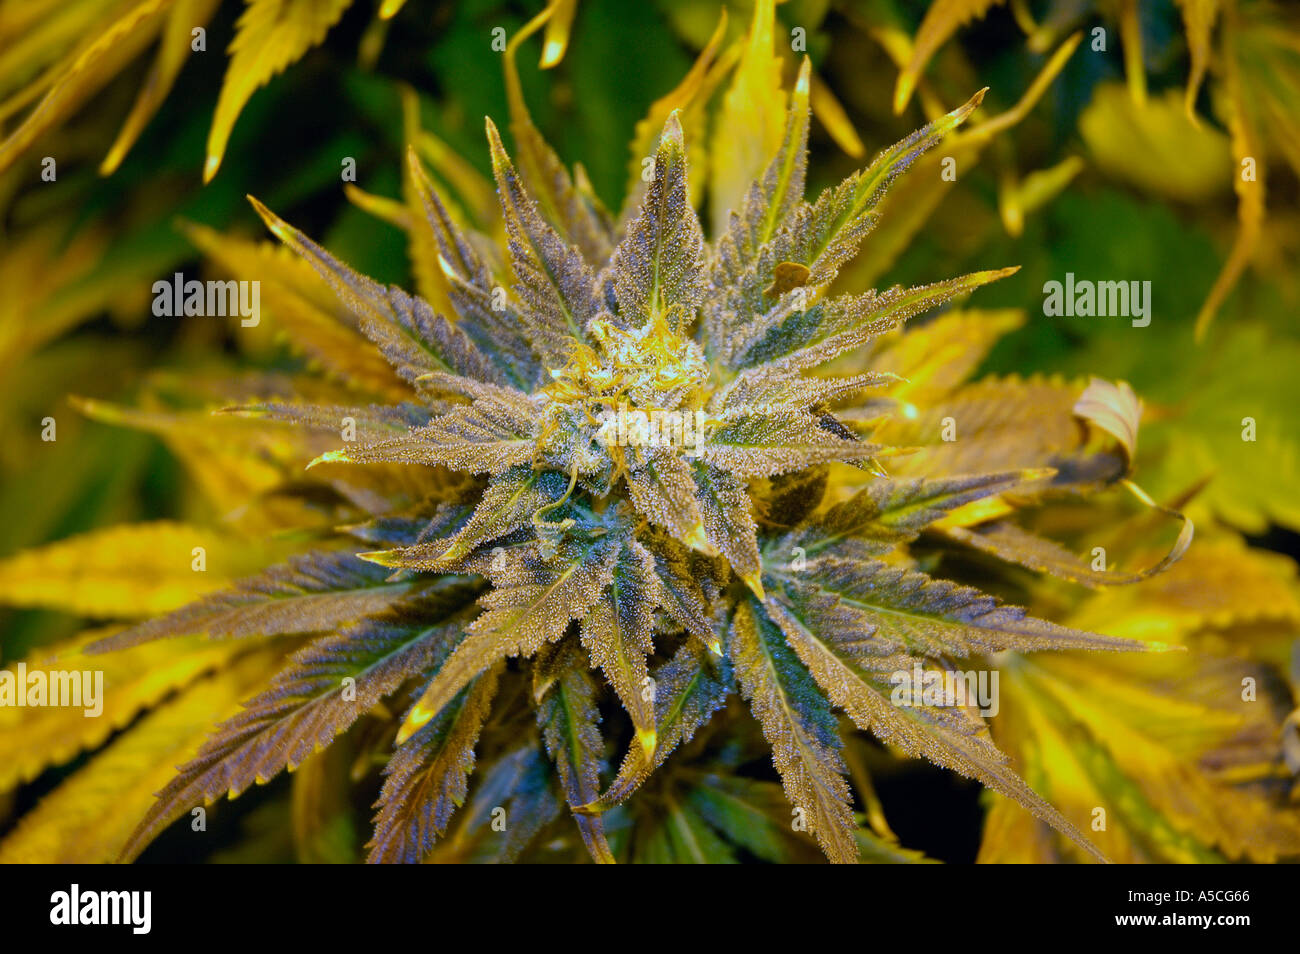 The bud of a cannabis plant Stock Photo